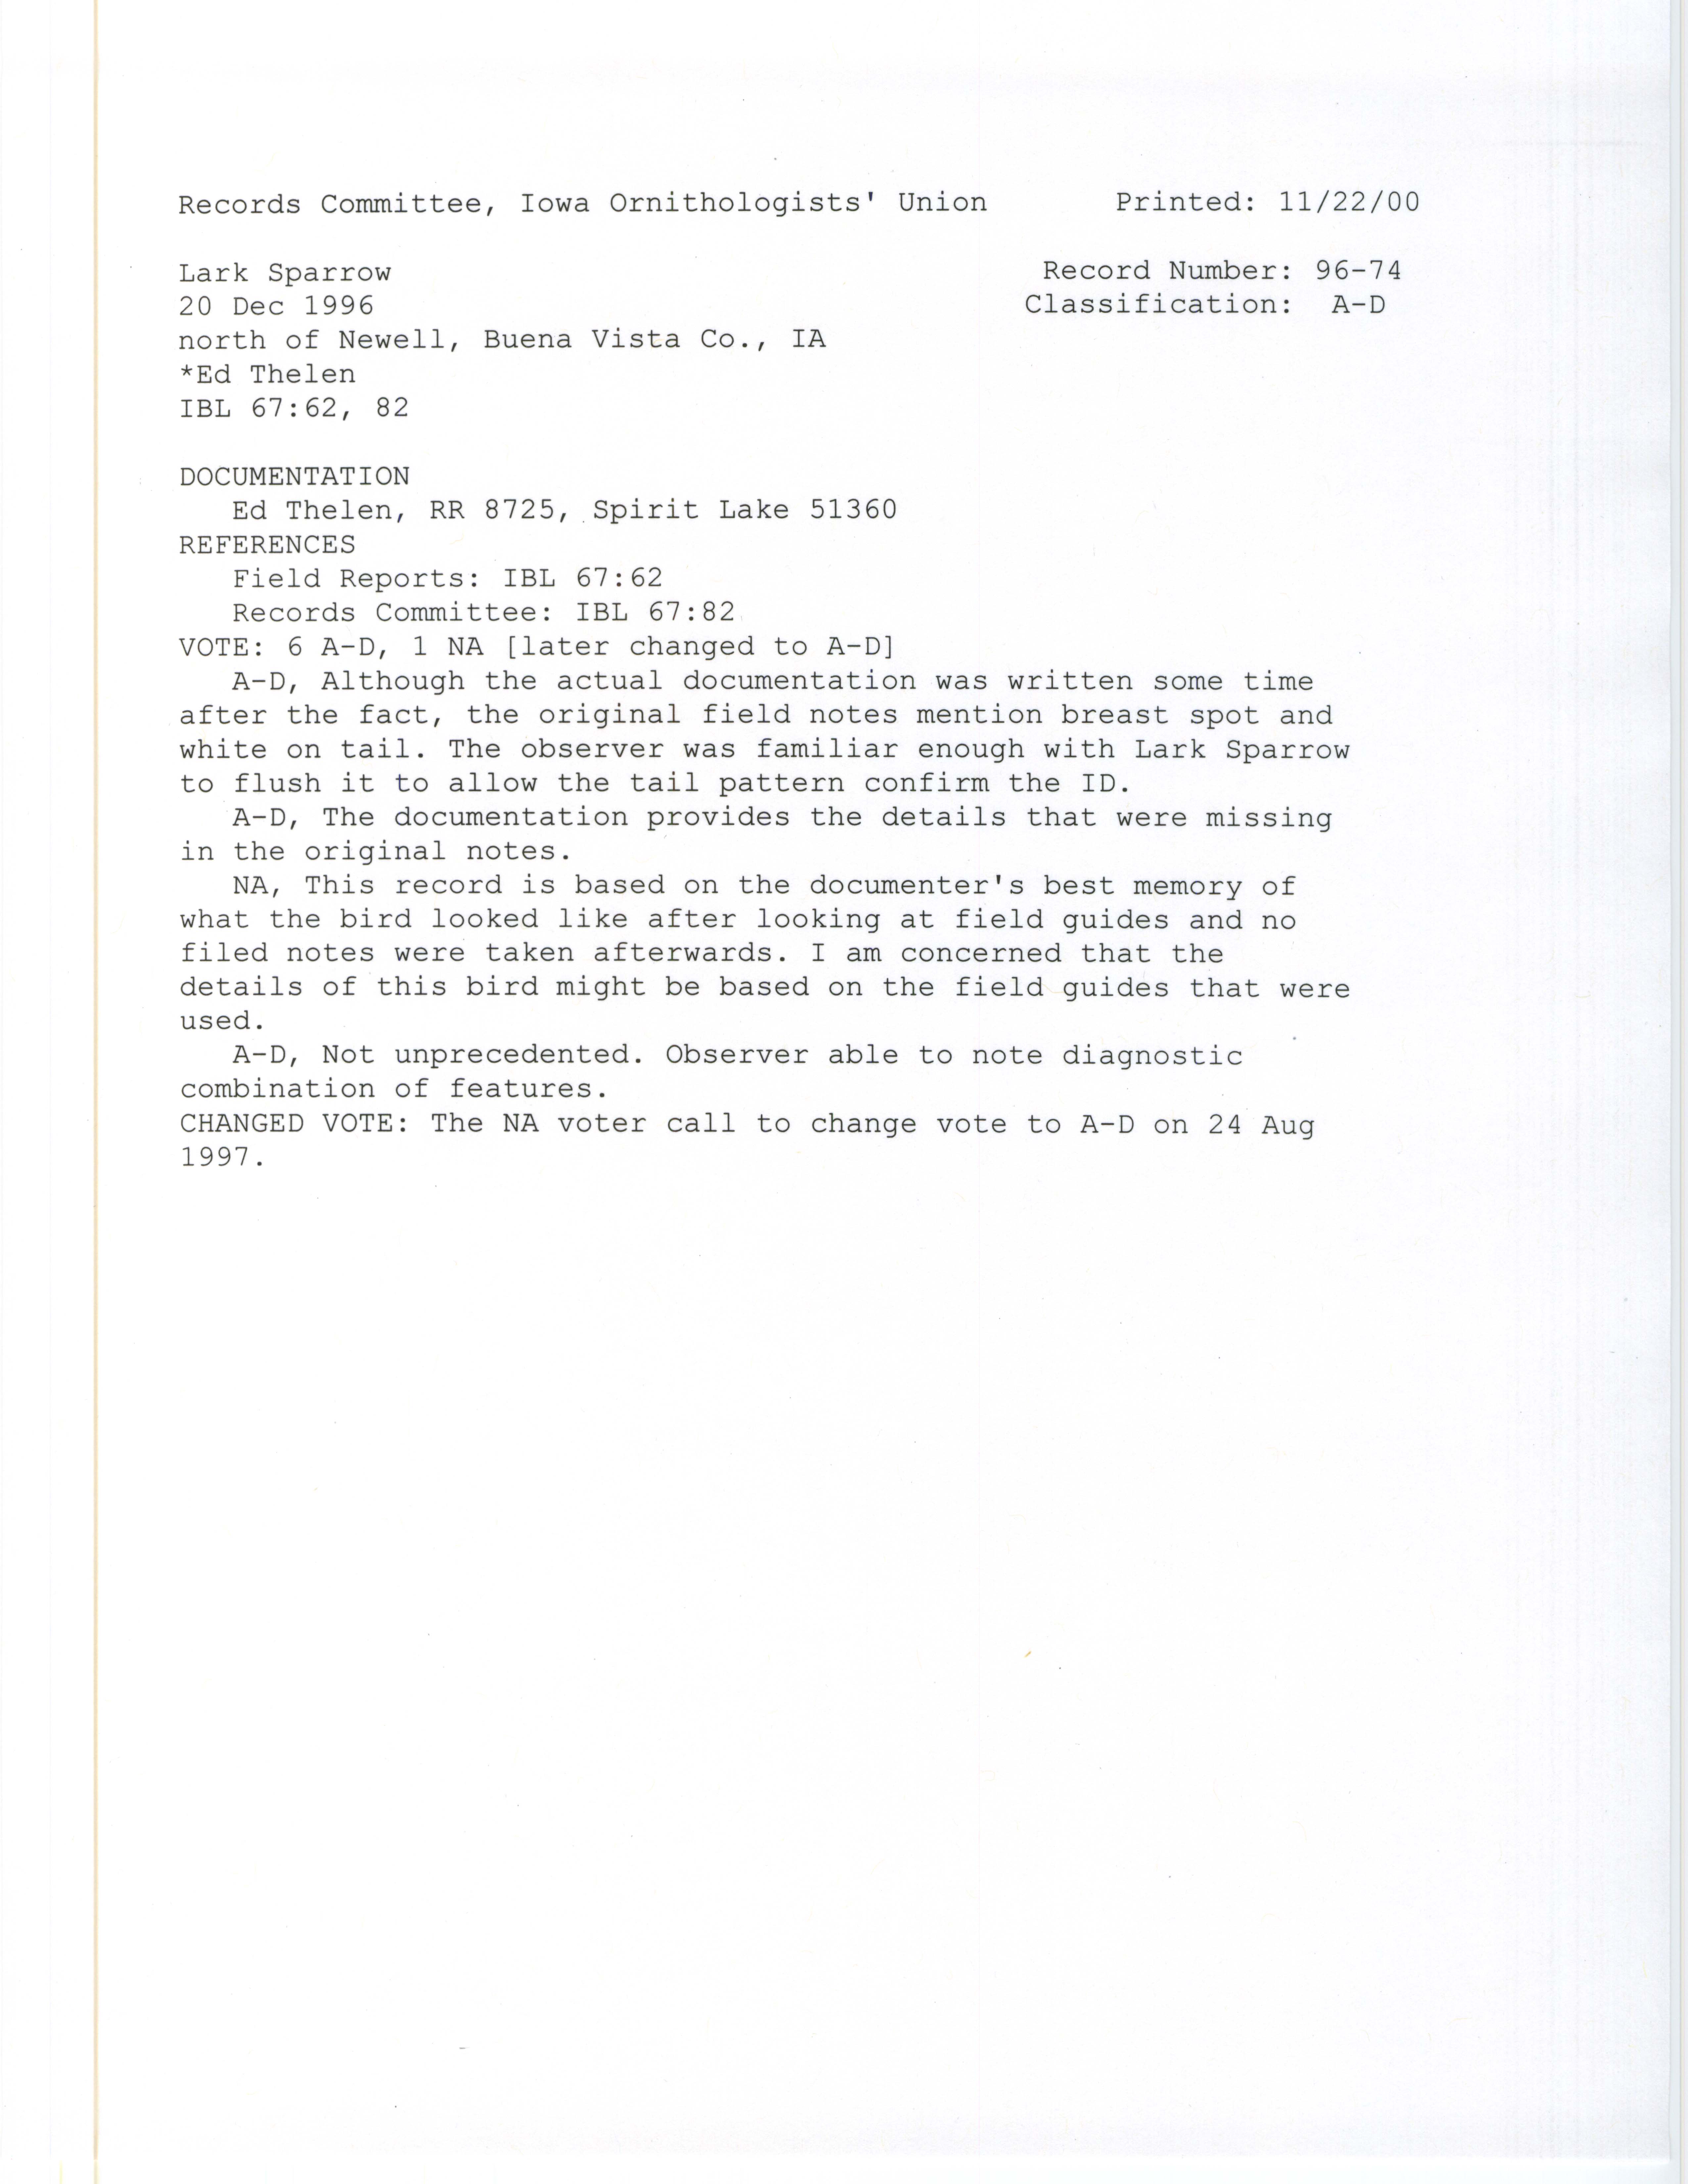 Records Committee review for rare bird sighting for Lark Sparrow north of Newell, 1996